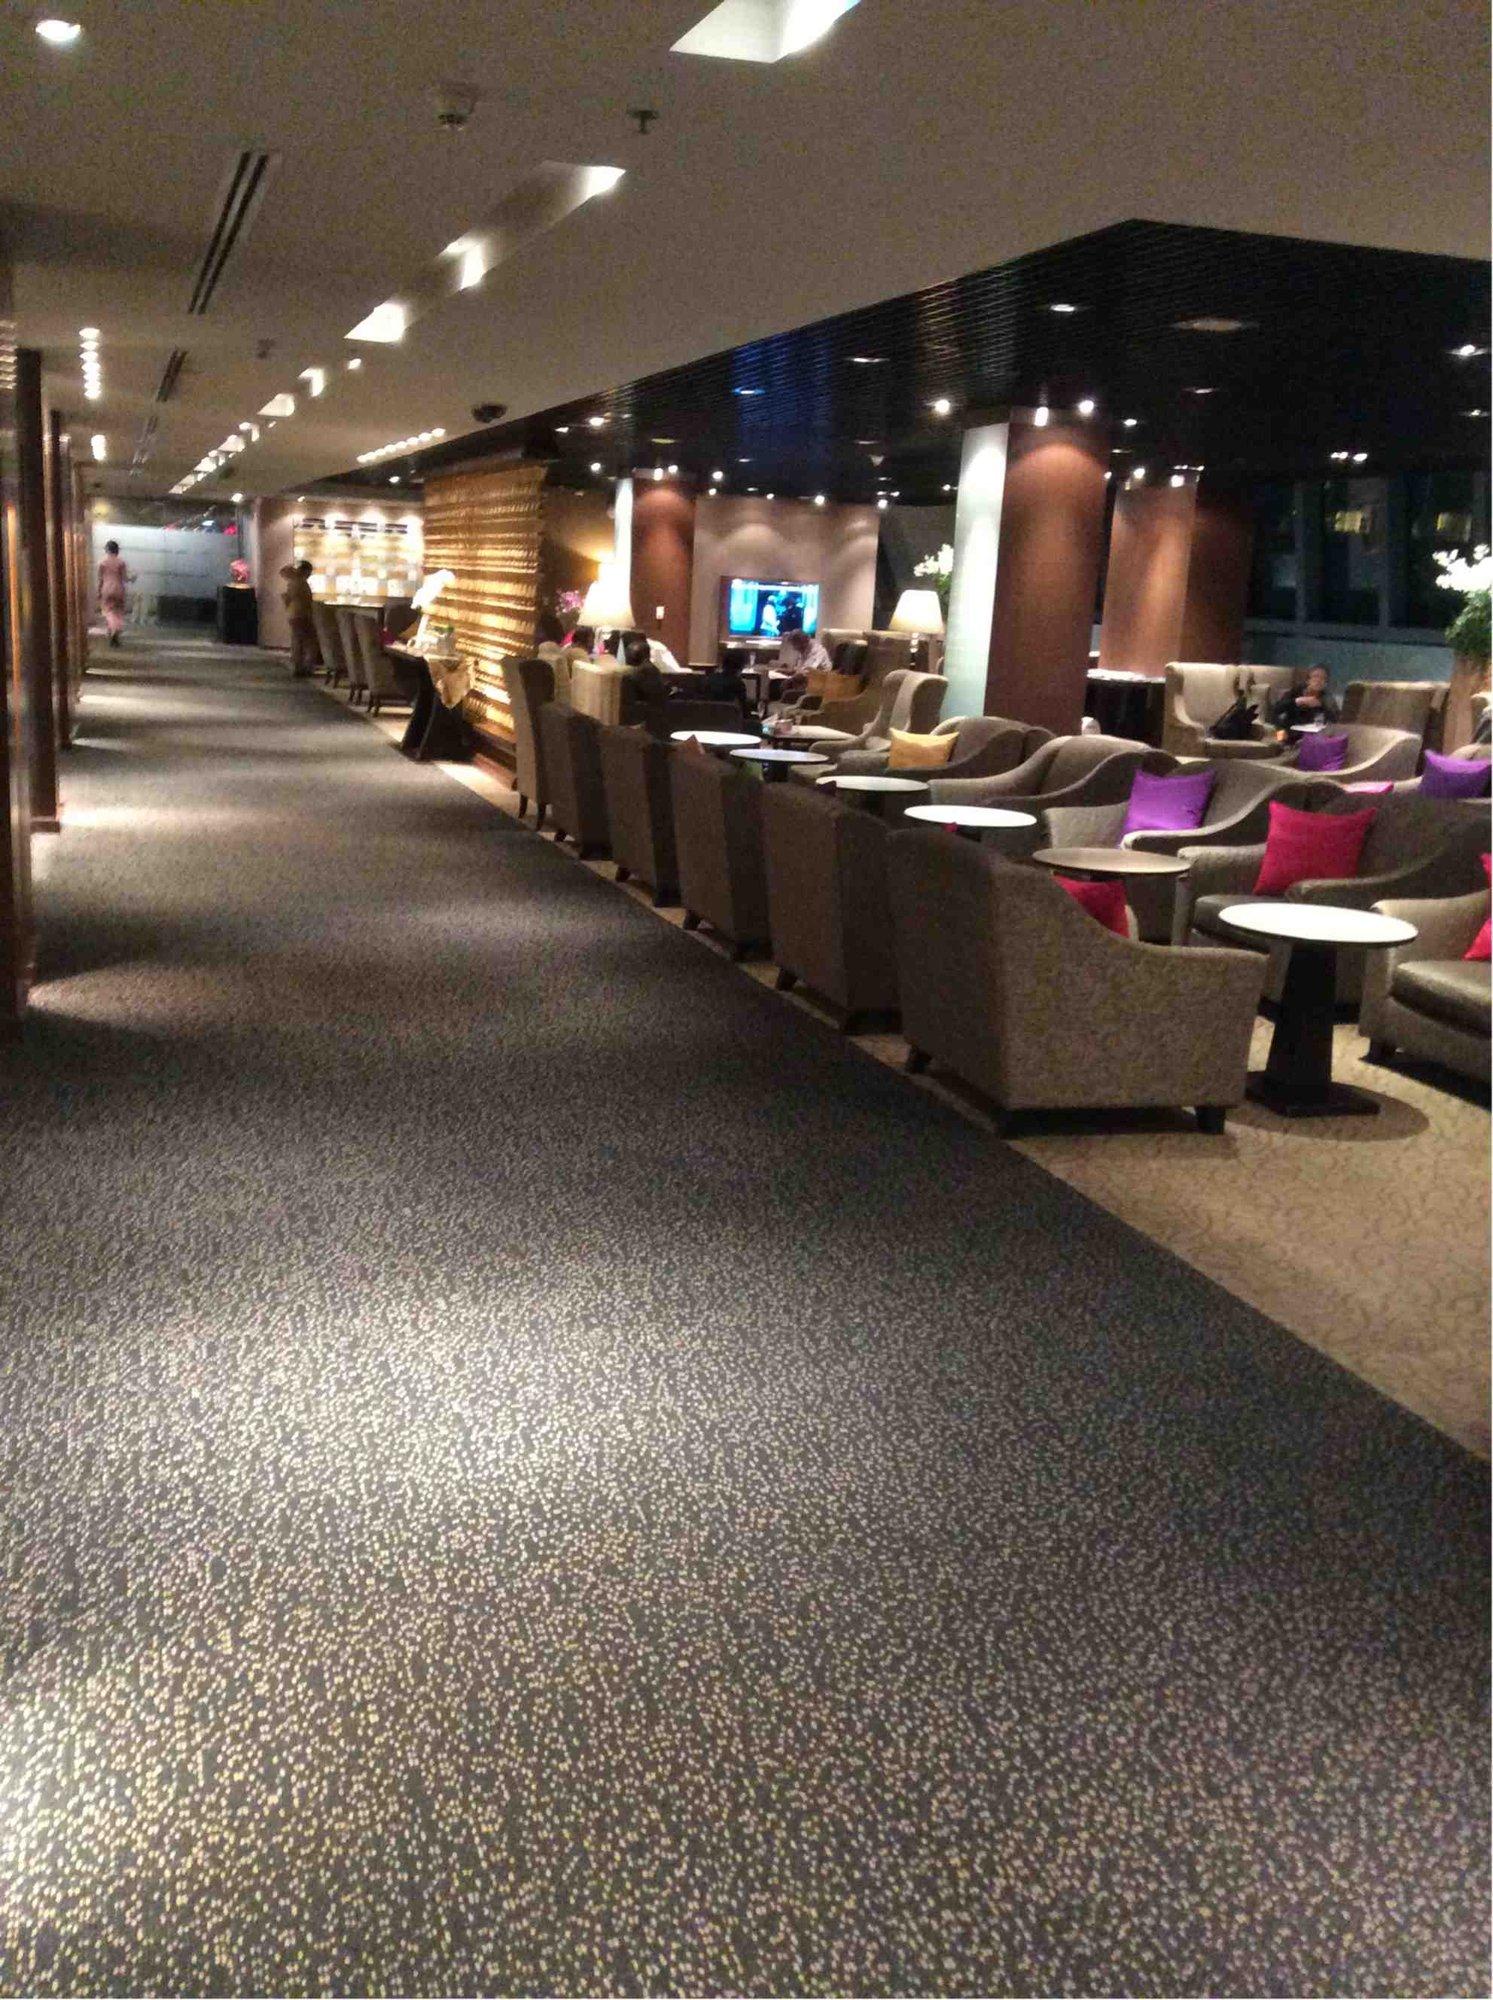 Thai Airways Royal First Class Lounge image 9 of 44